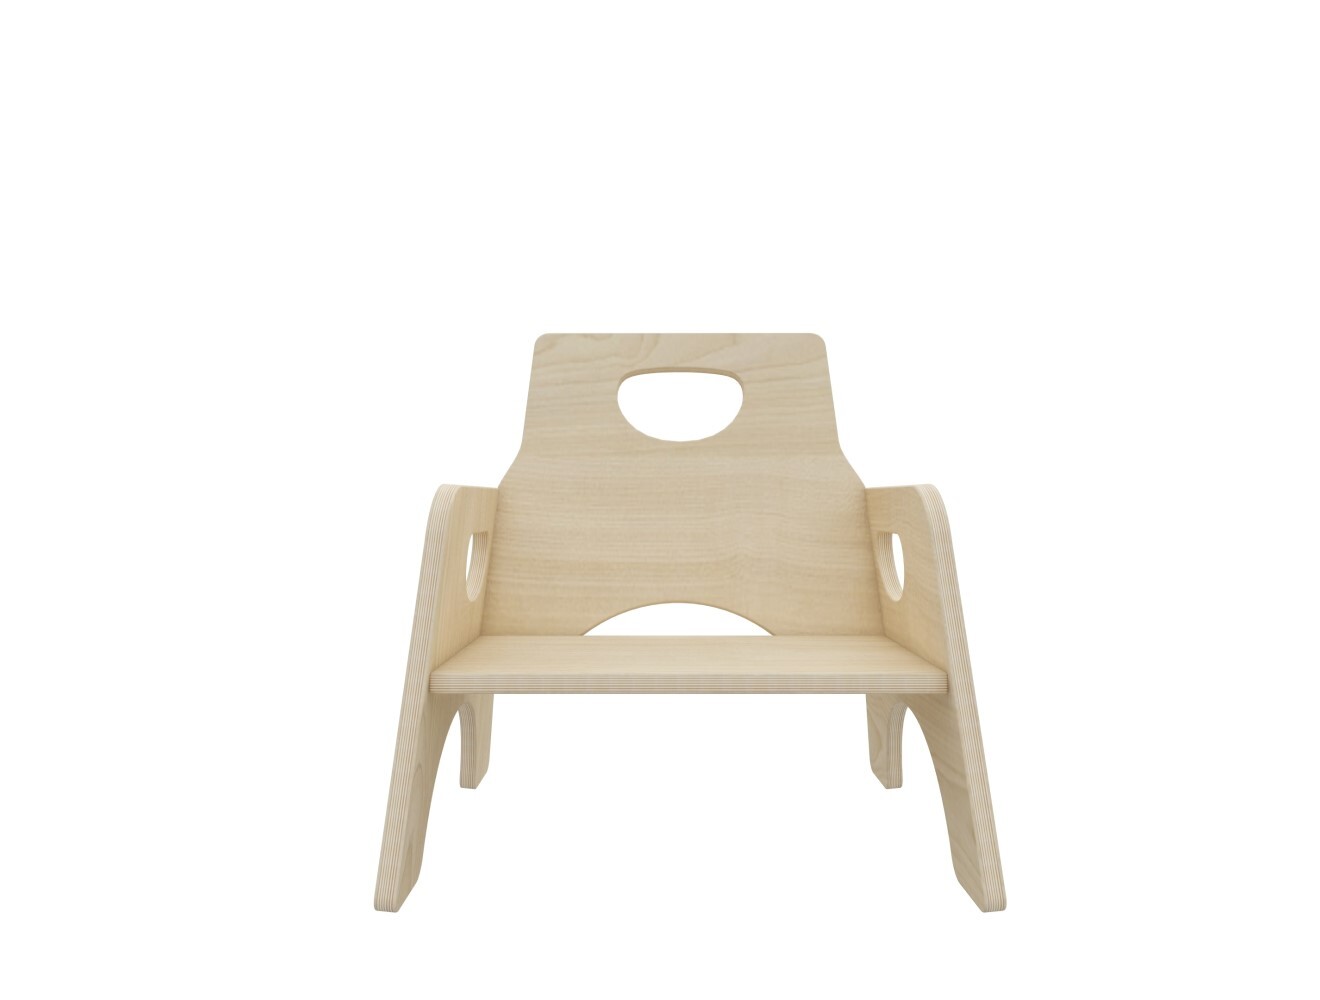 Jooyes Kids Stackable Wooden Toddler Chair H25cm - 6 Pack